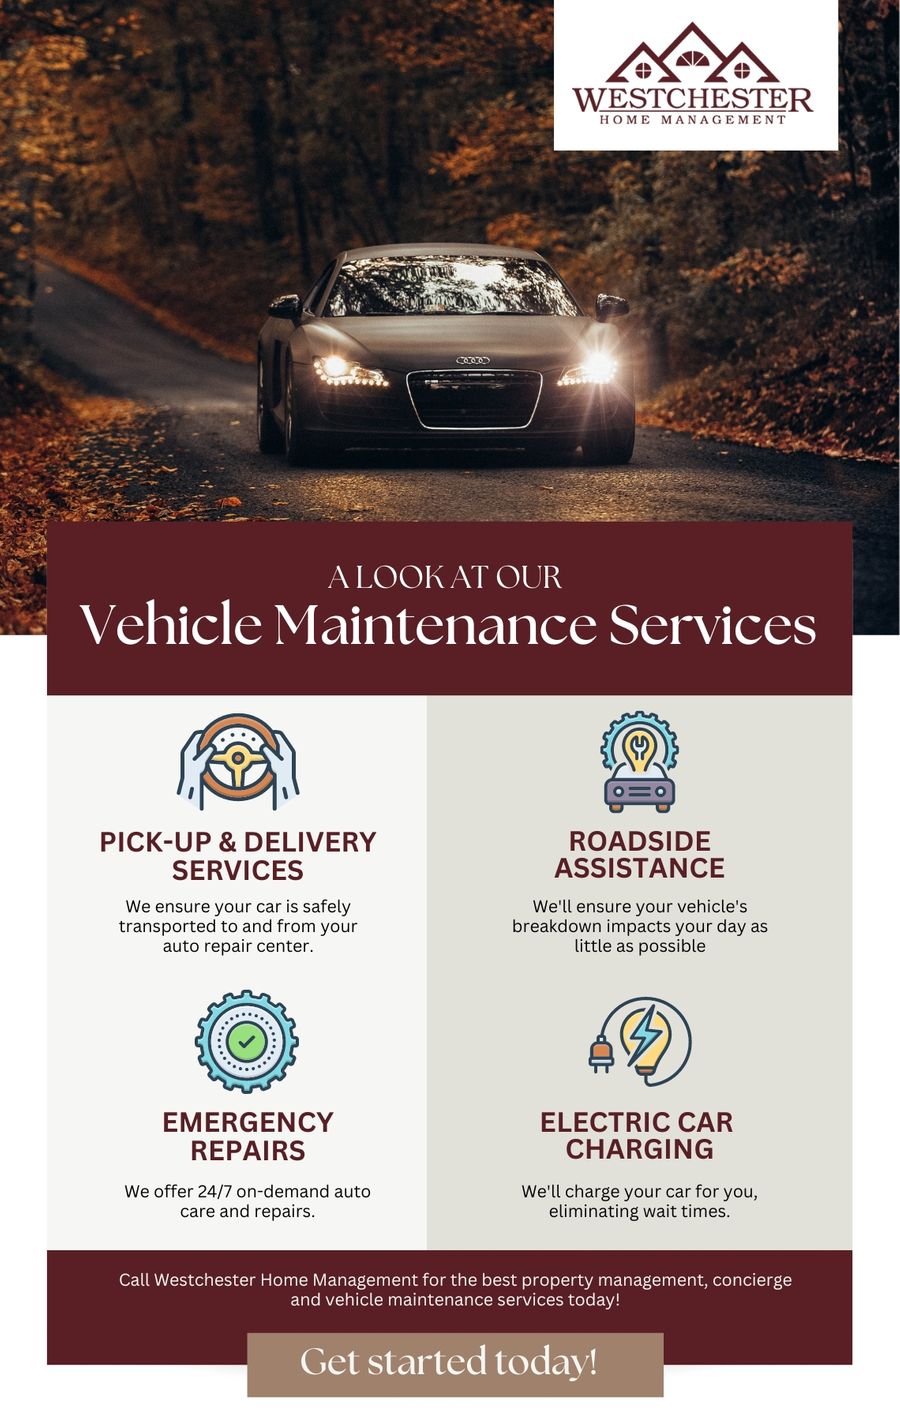 M30208 - Westchester Home Management -A Look At Our Vehicle Maintenance Services Infographic .jpg